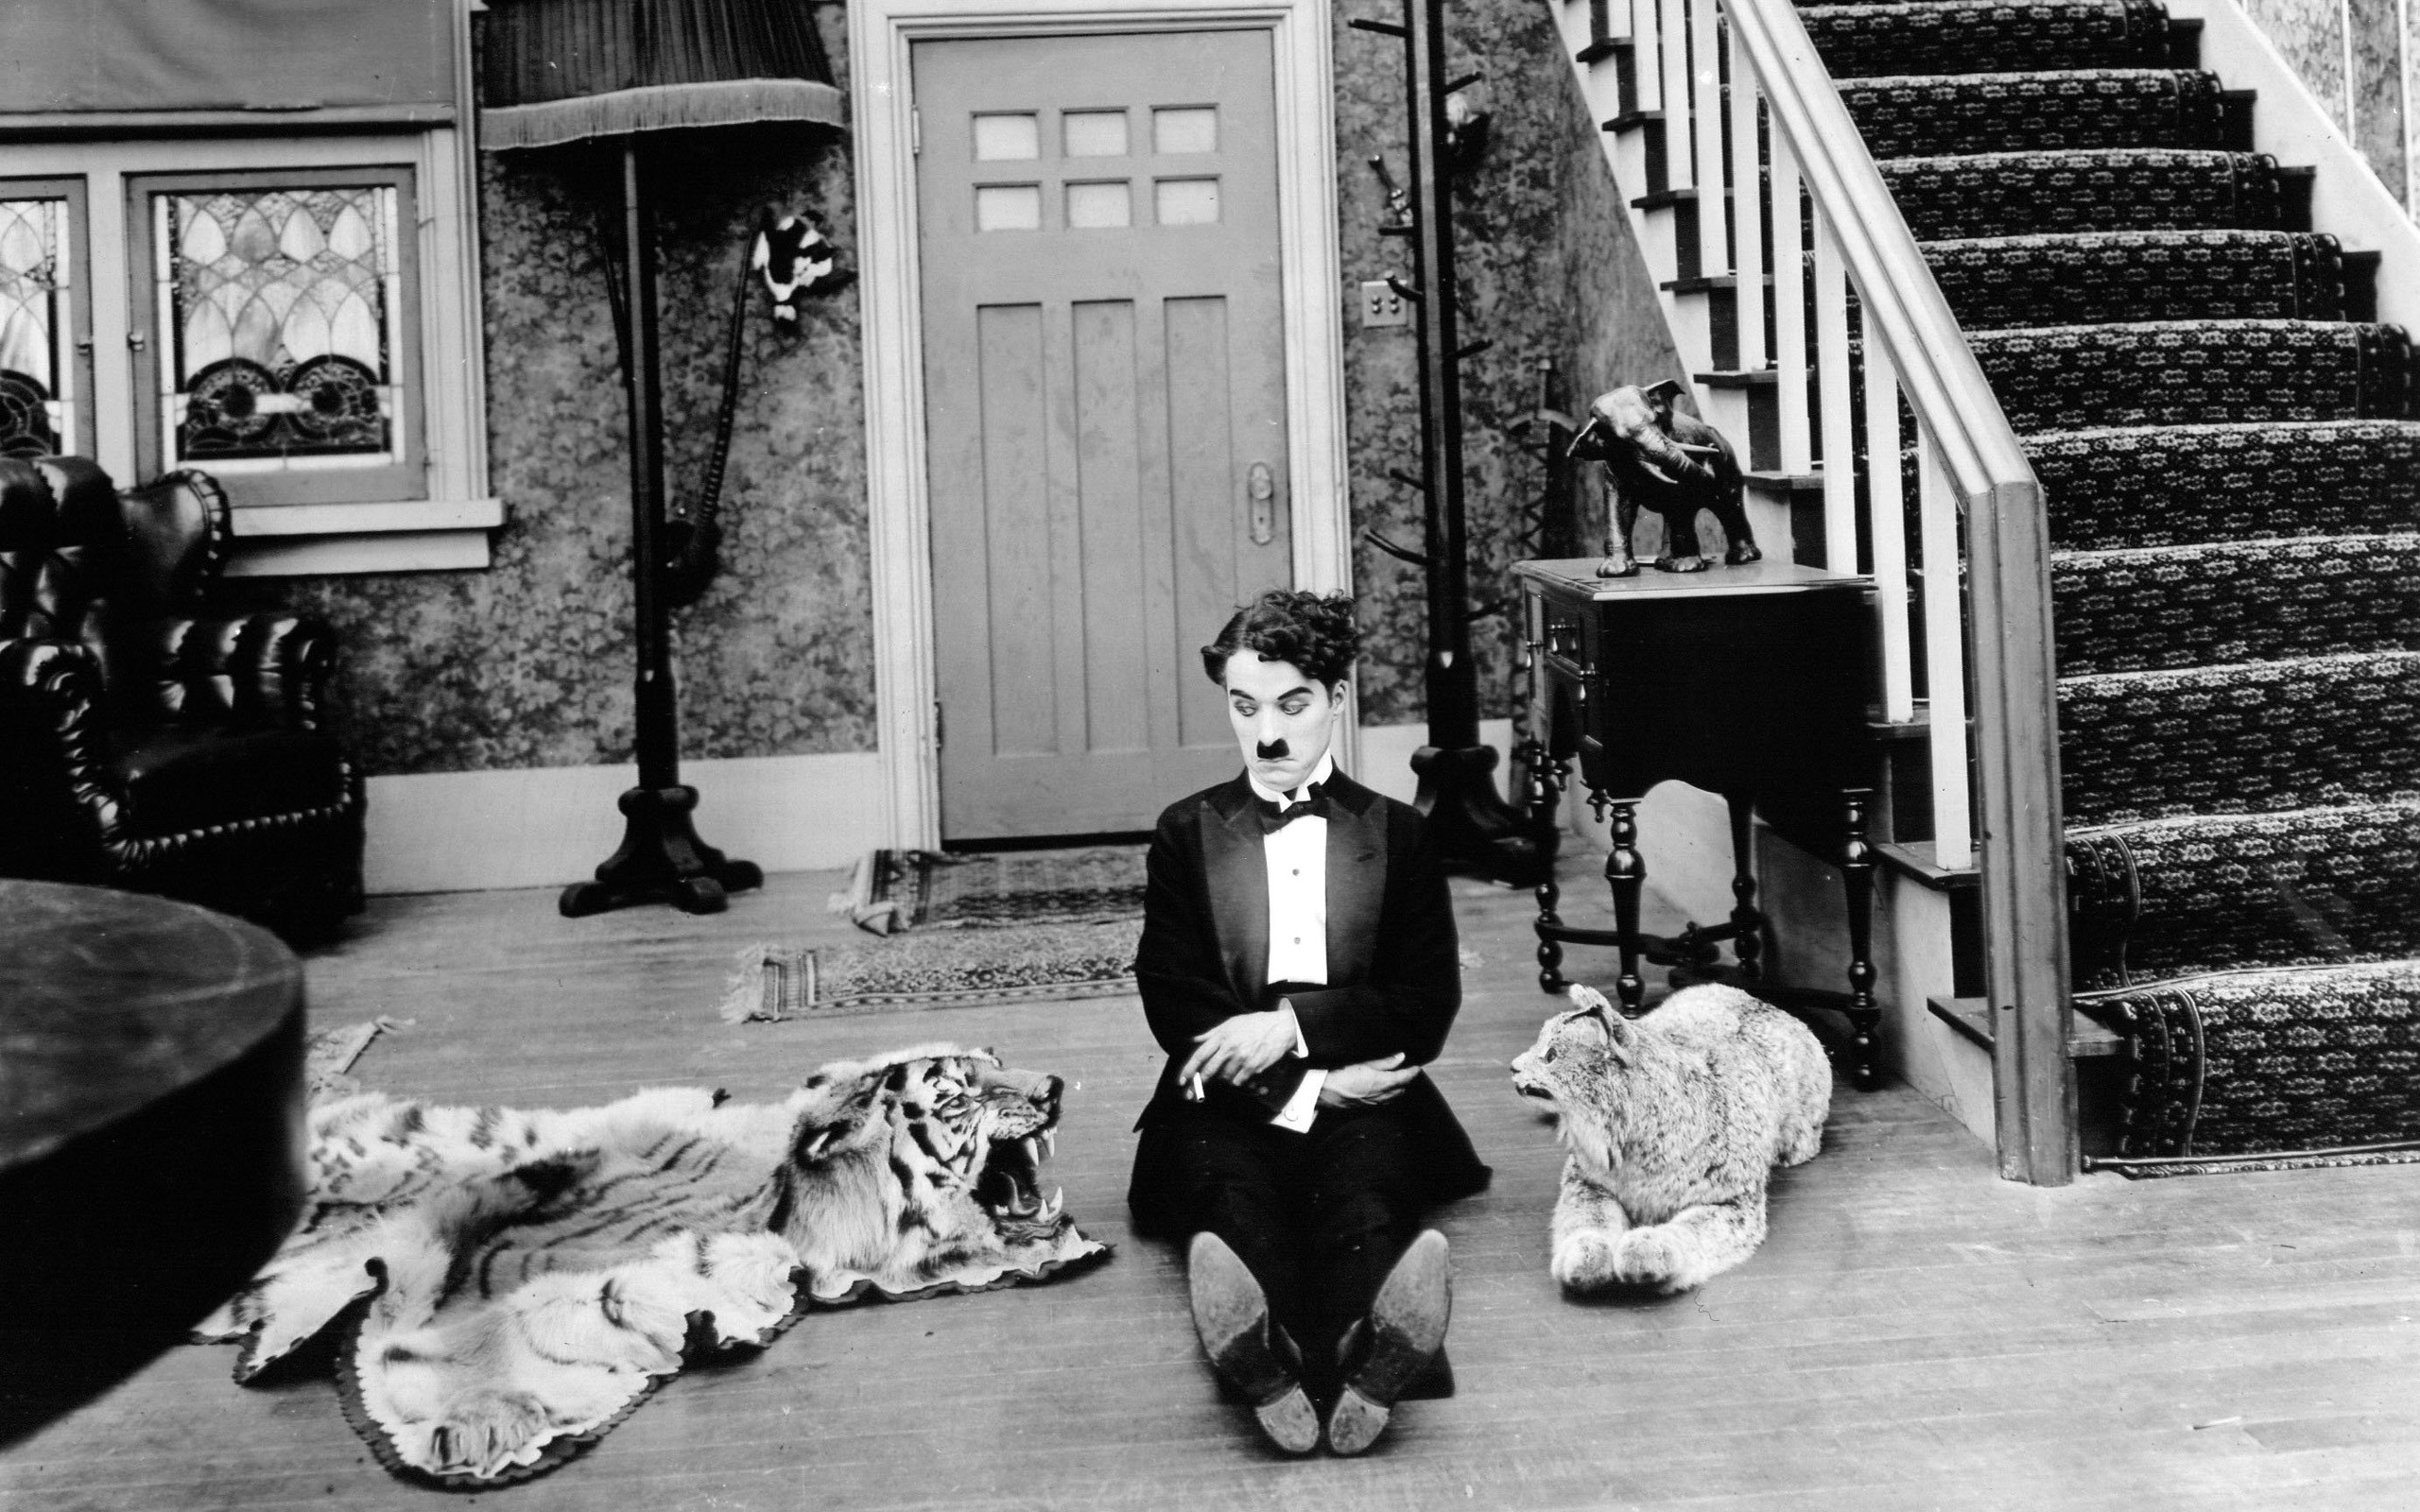 People 2560x1600 Charlie Chaplin The Tramp movies monochrome actor vintage